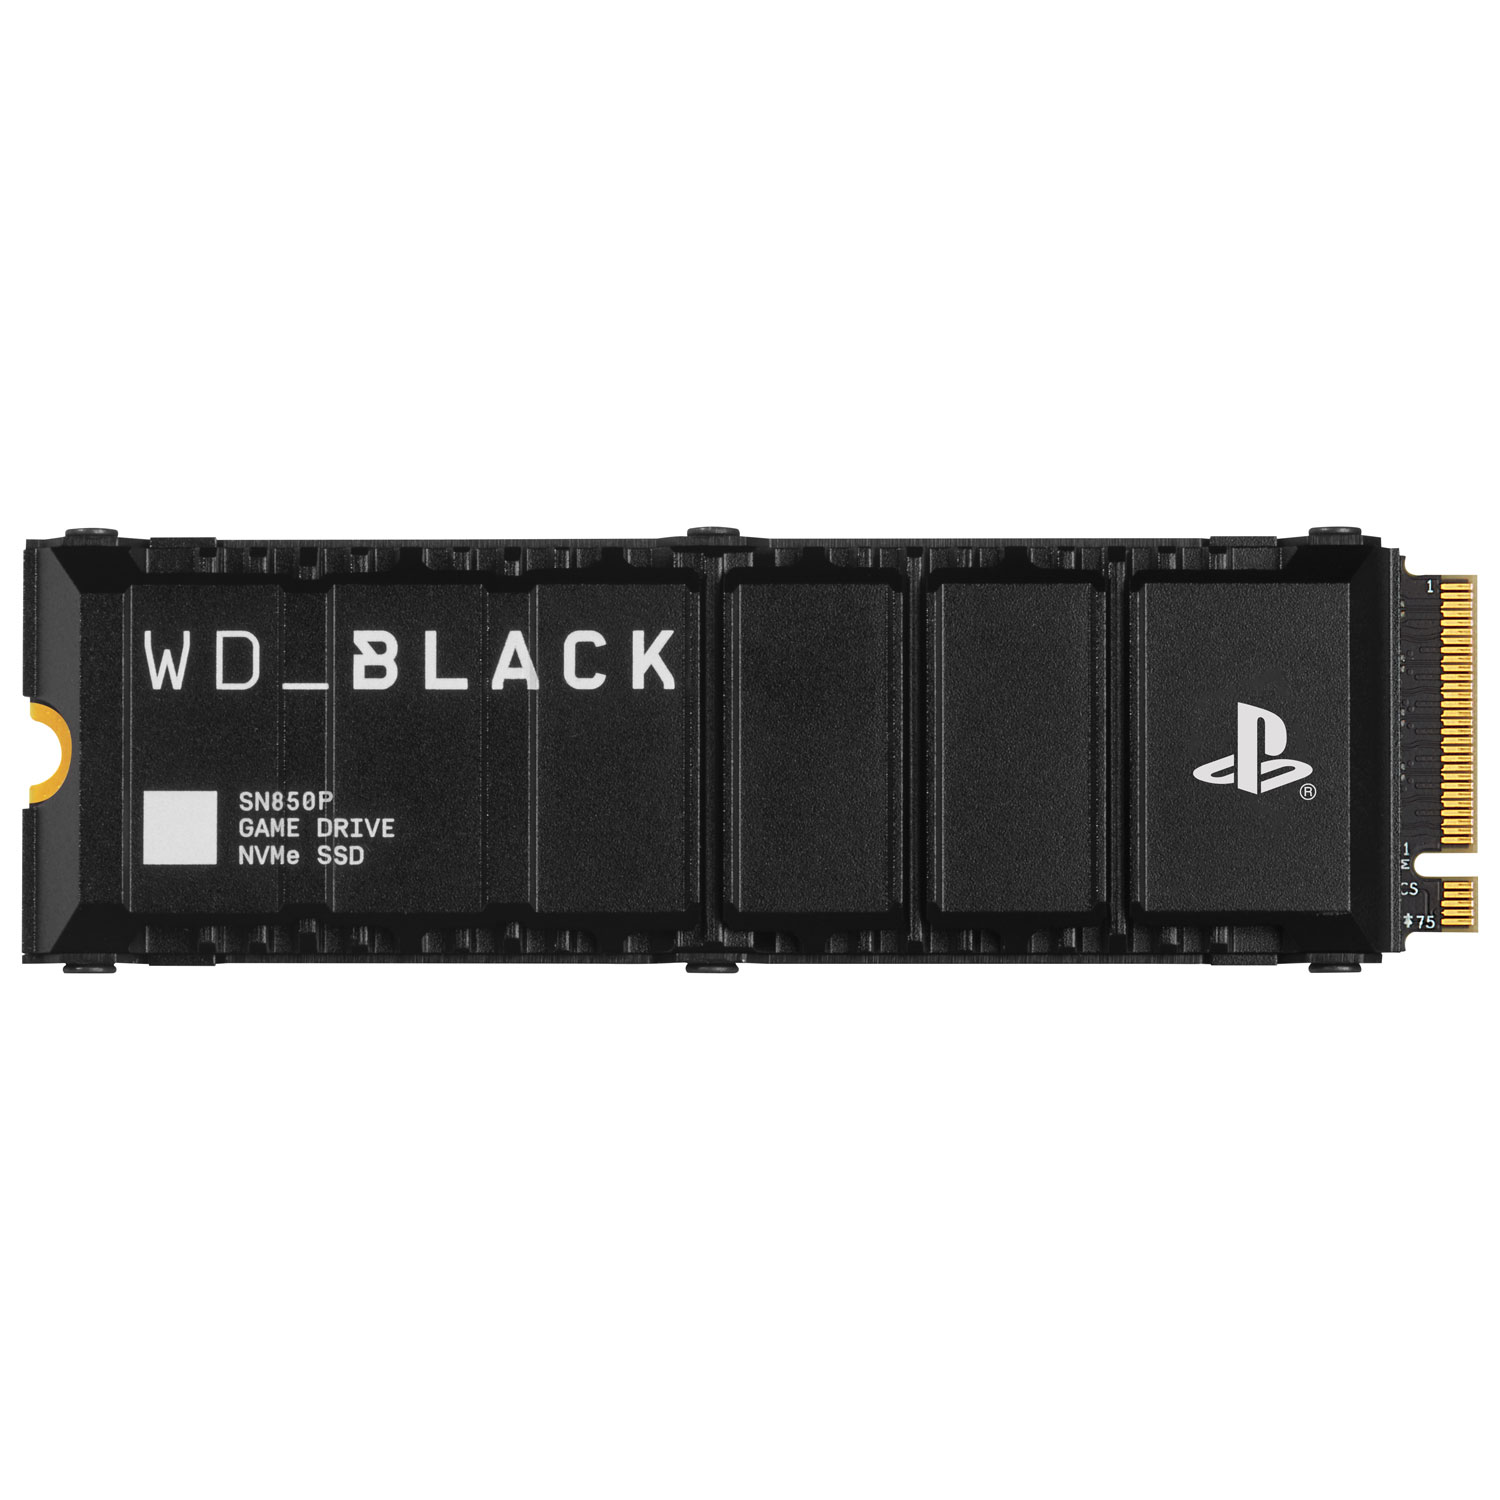 WD_BLACK SN850P 1TB NVMe PCI-e Internal Solid State Drive with Heatsink - Officially Licensed for PS5